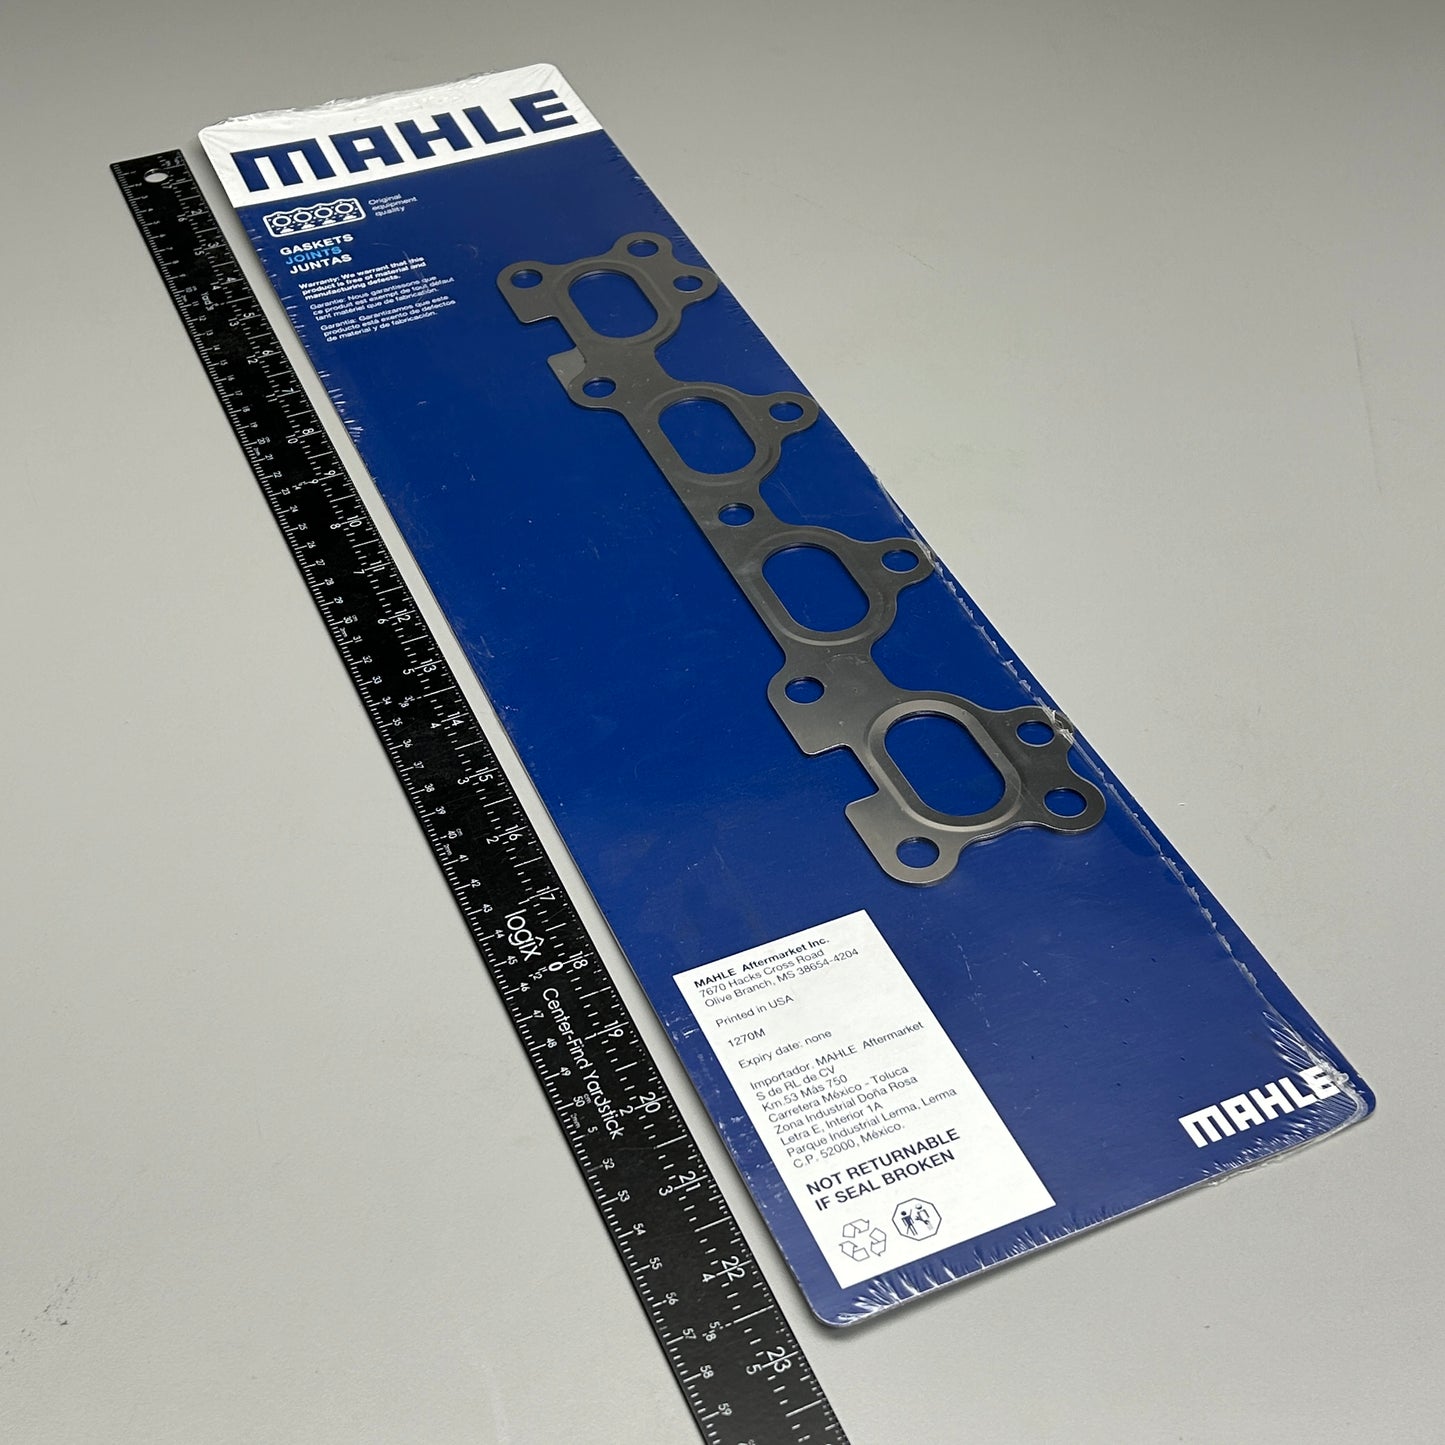 MAHLE Exhaust Manifold Gasket Set for Mazda MS15633 (New)